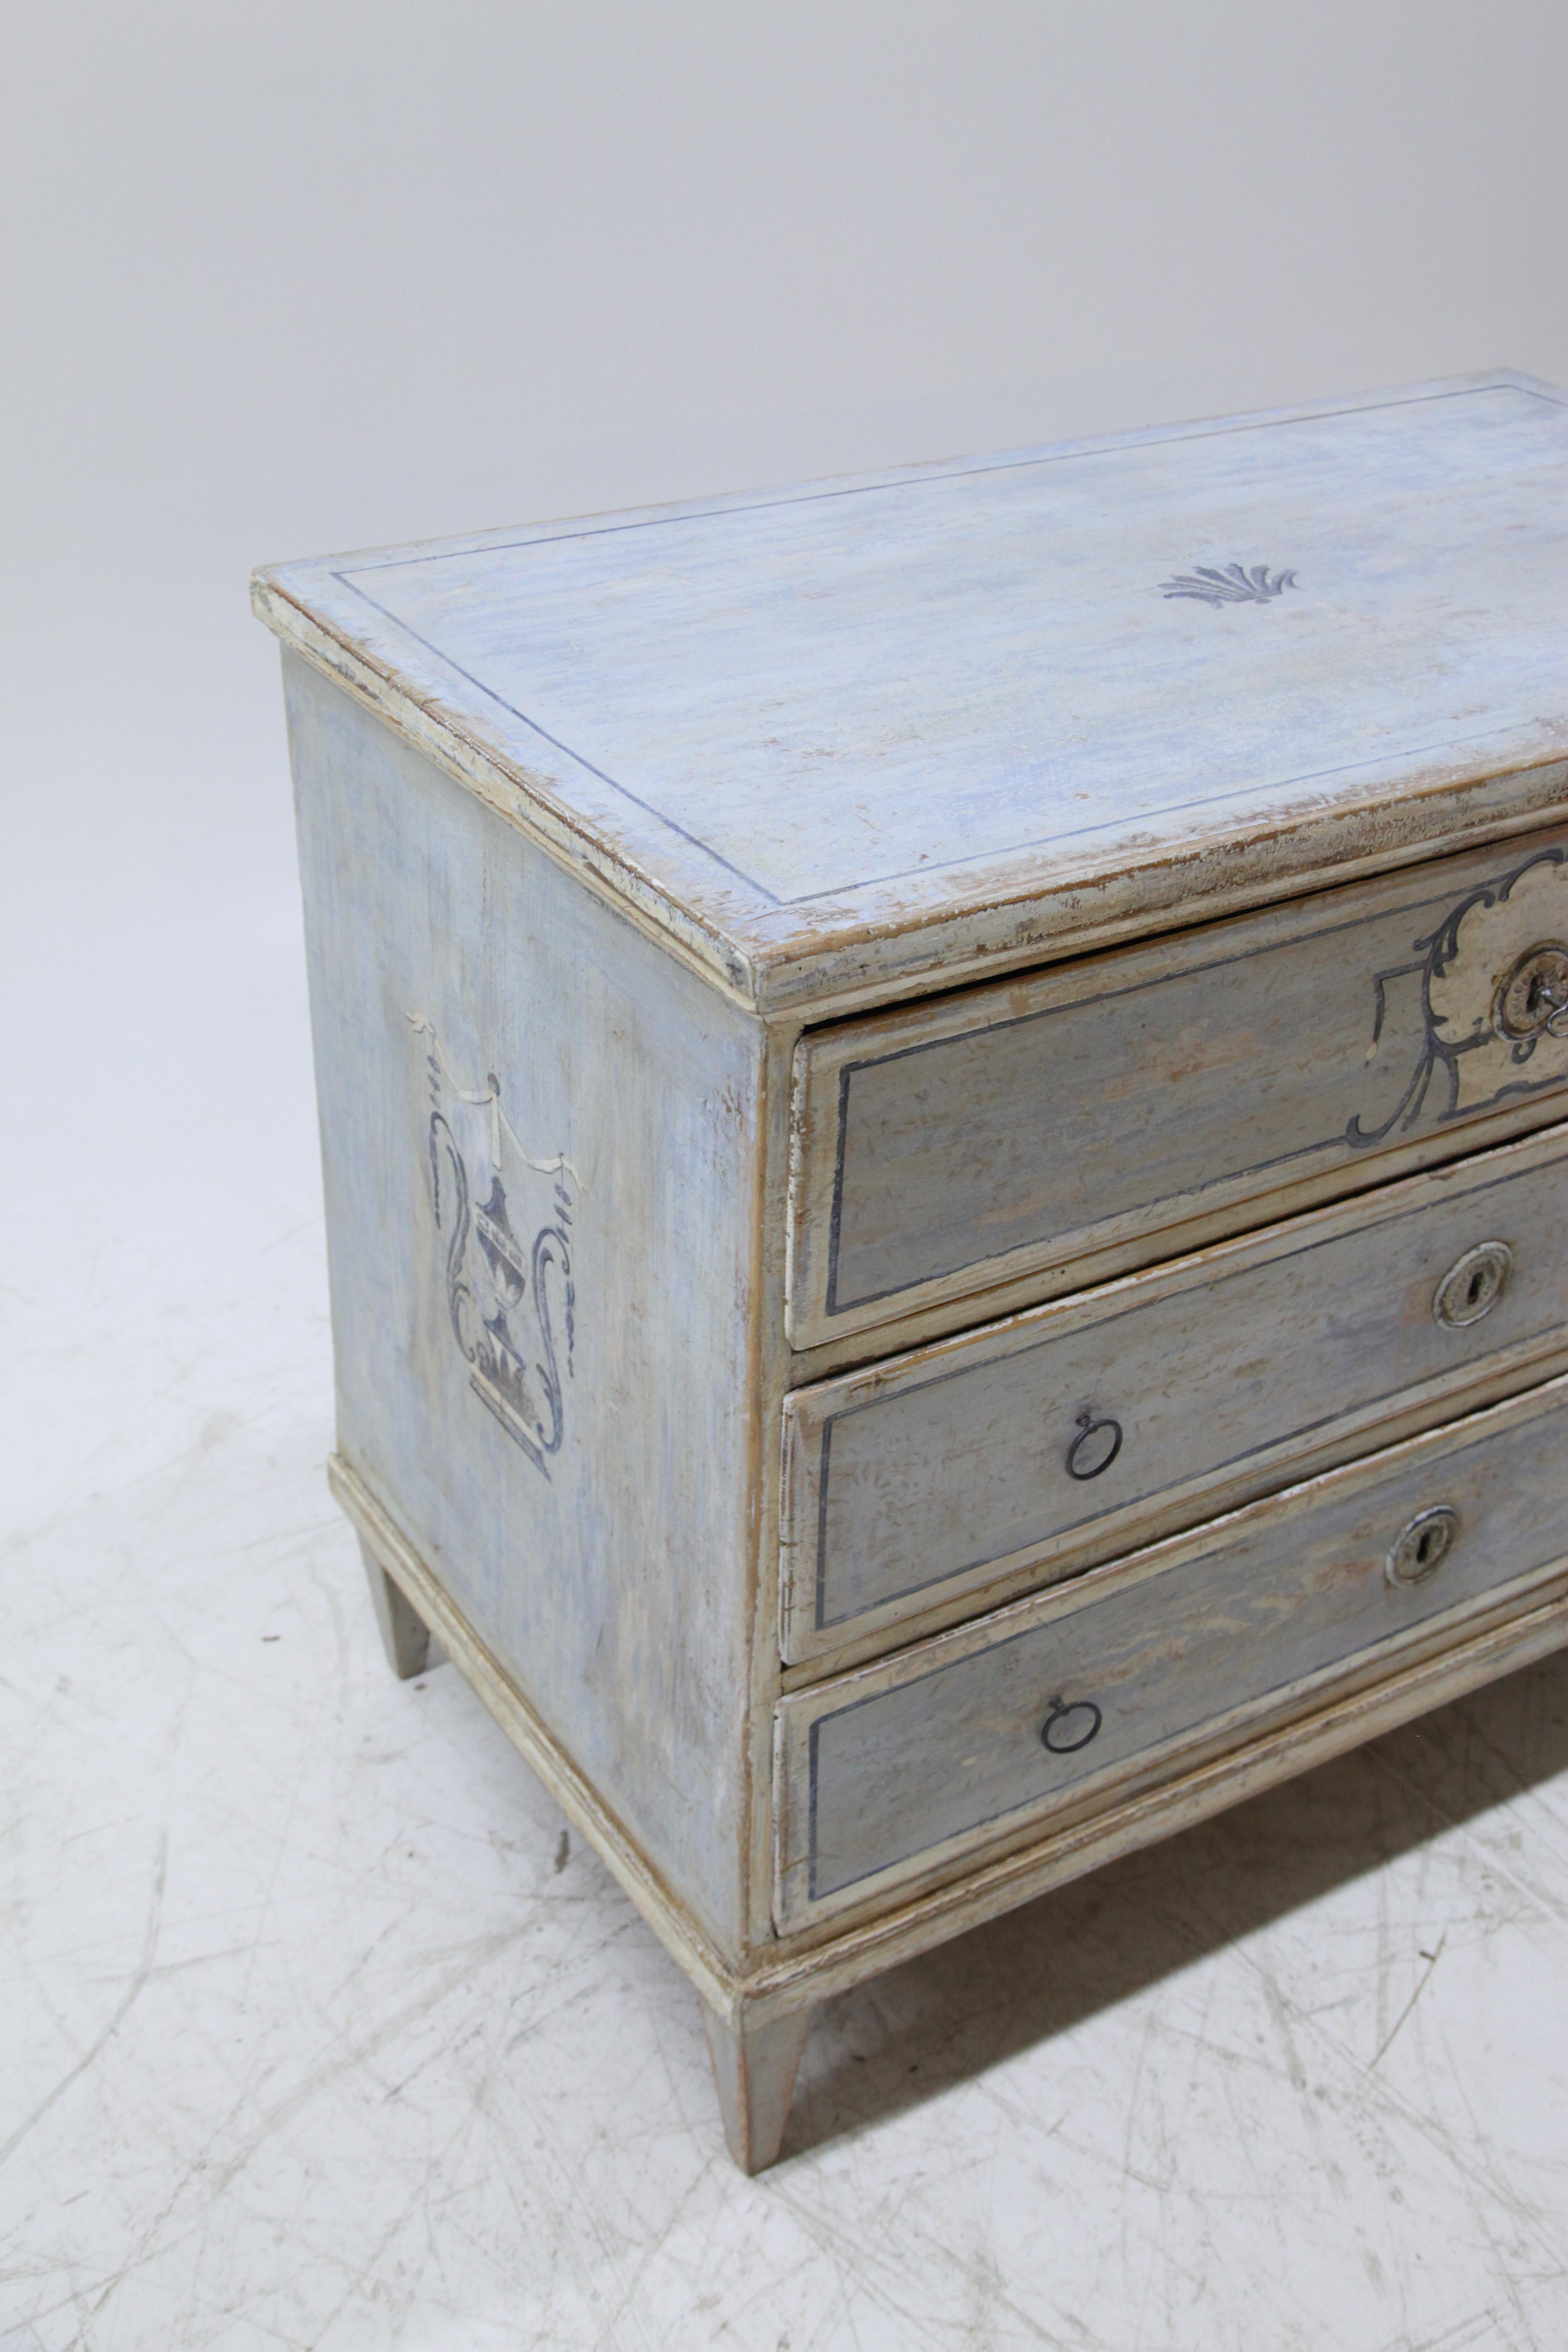 Hand-Painted Painted Biedermeier Chest of Drawers, circa 1820